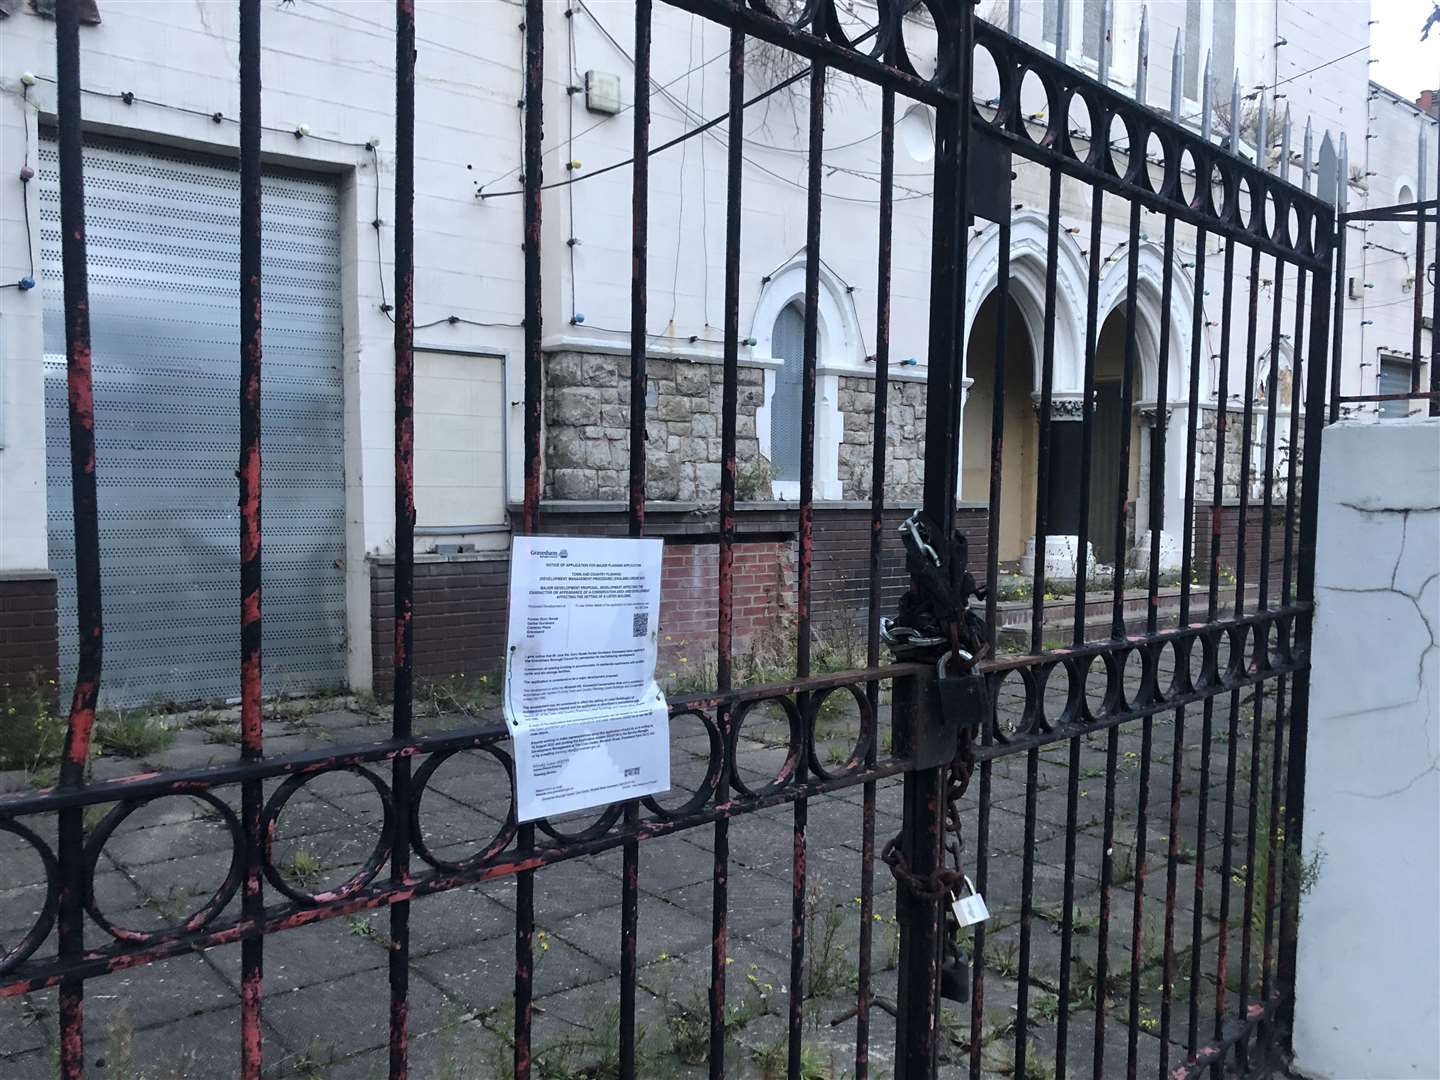 There were previous plans to demolish the building but these were refused